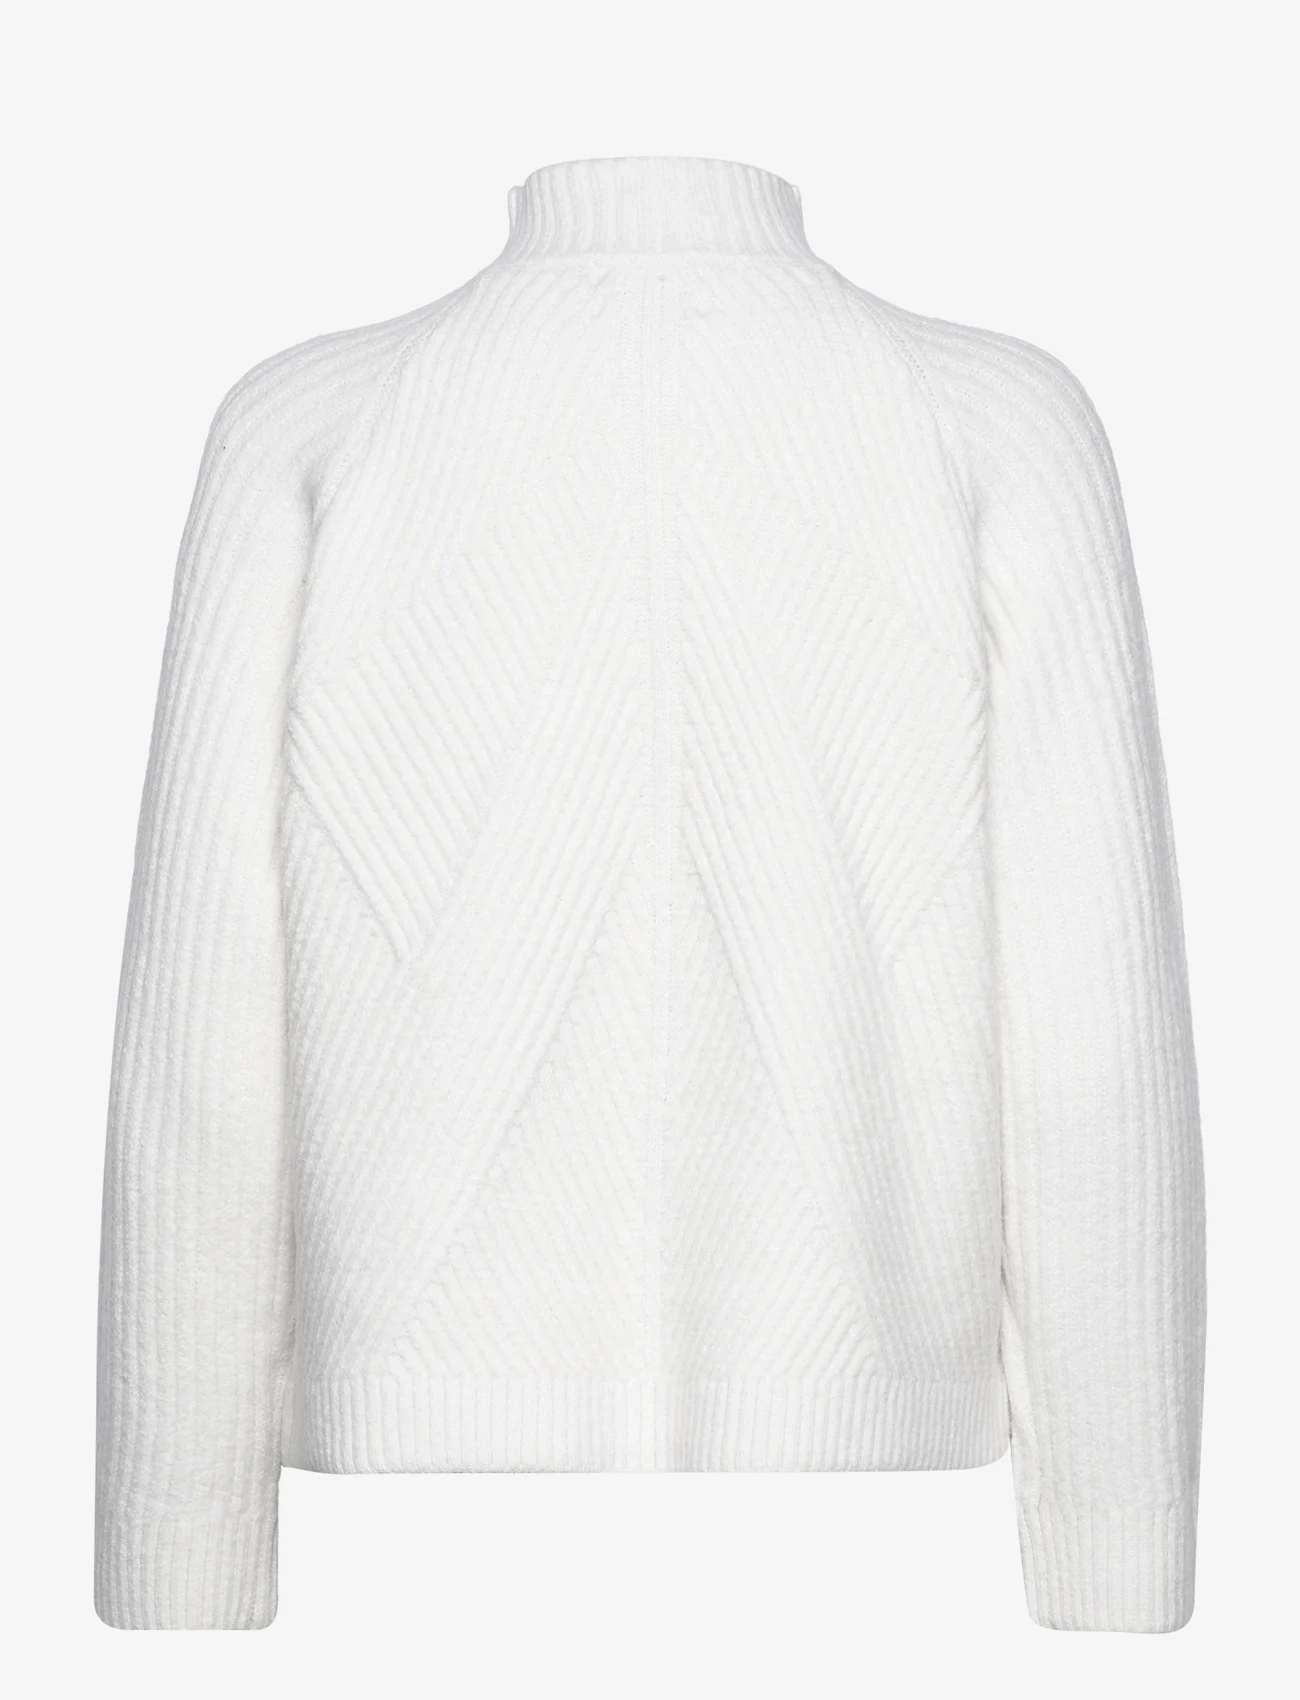 Sofie Schnoor - Sweater - swetry - off white - 1